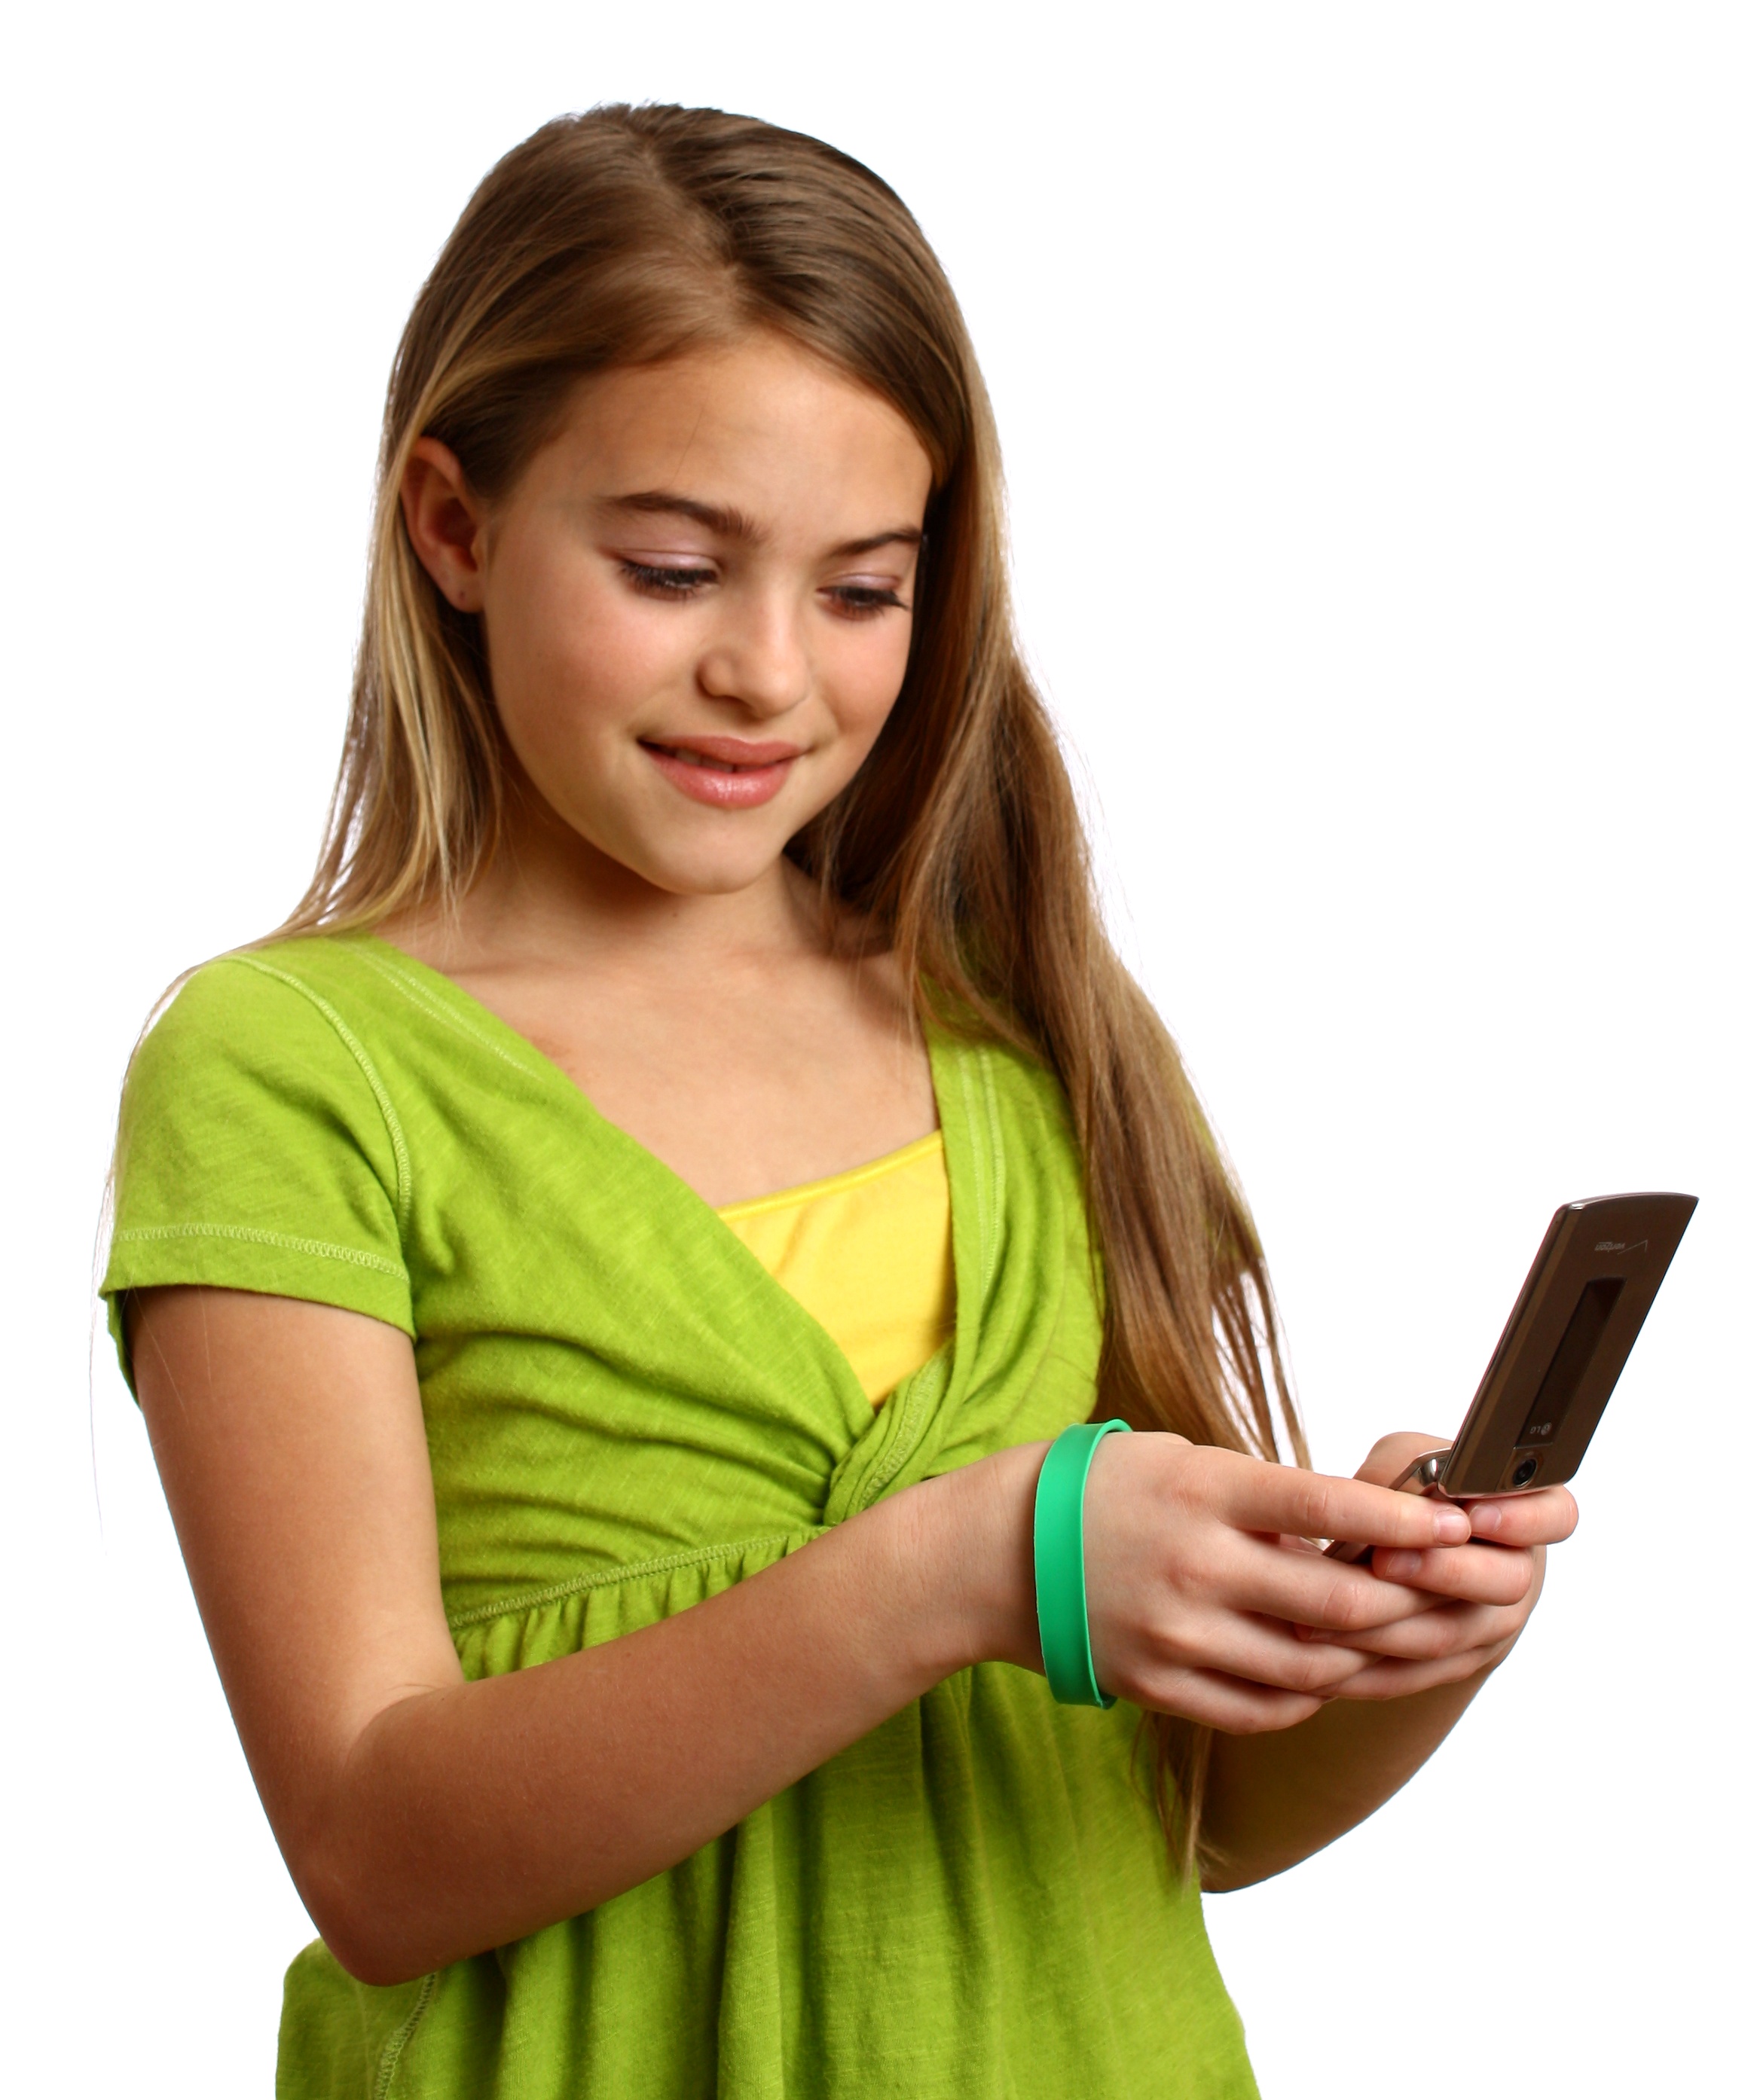 A beautiful young girl texting on a cell, Beautiful, Phones, Tweens, Texting, HQ Photo